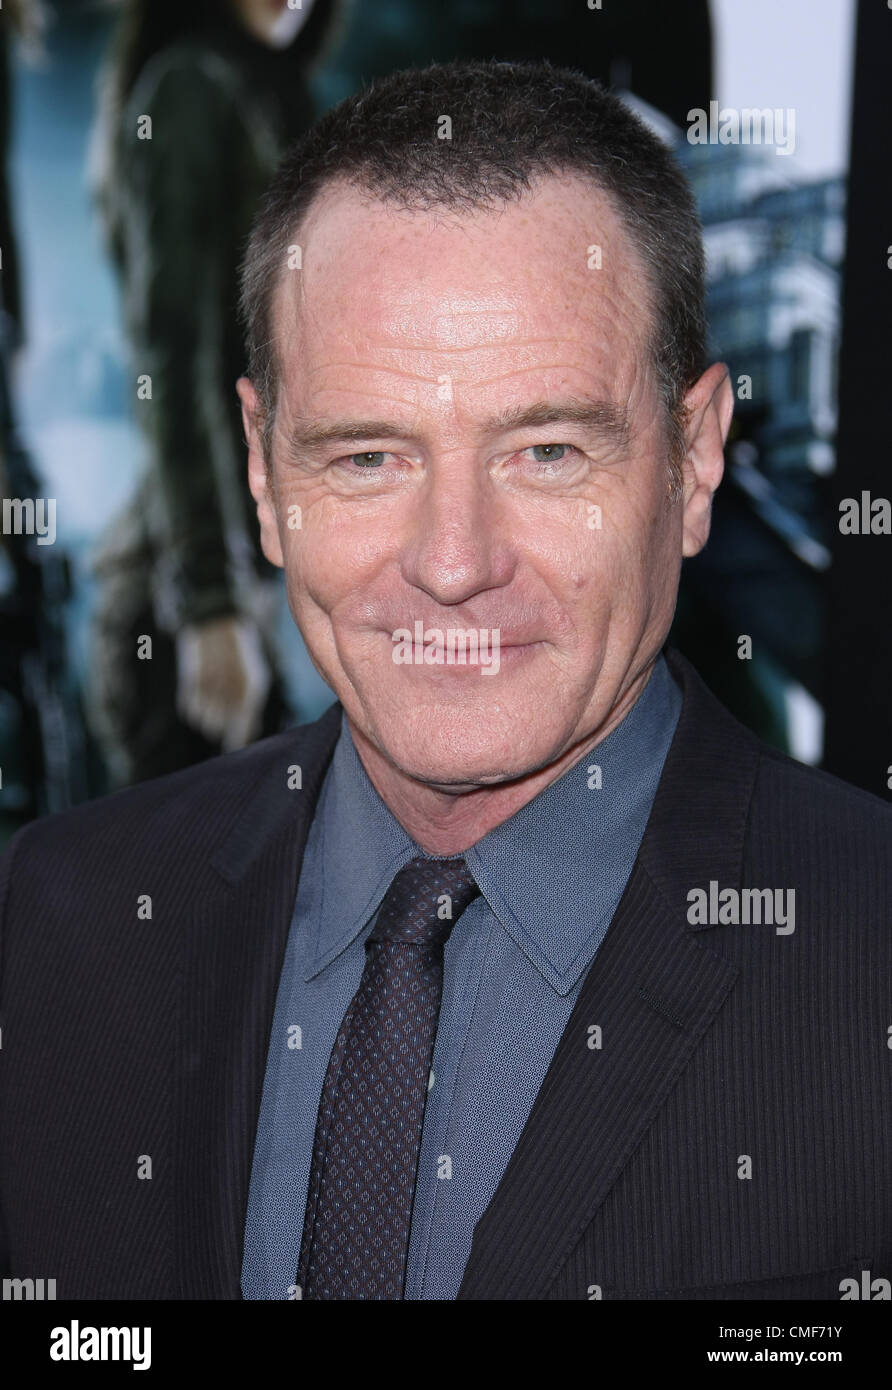 BRYAN CRANSTON TOTAL RECALL. PREMIERE HOLLYWOOD LOS ANGELES CALIFORNIA USA 01 August 2012 Stock Photo